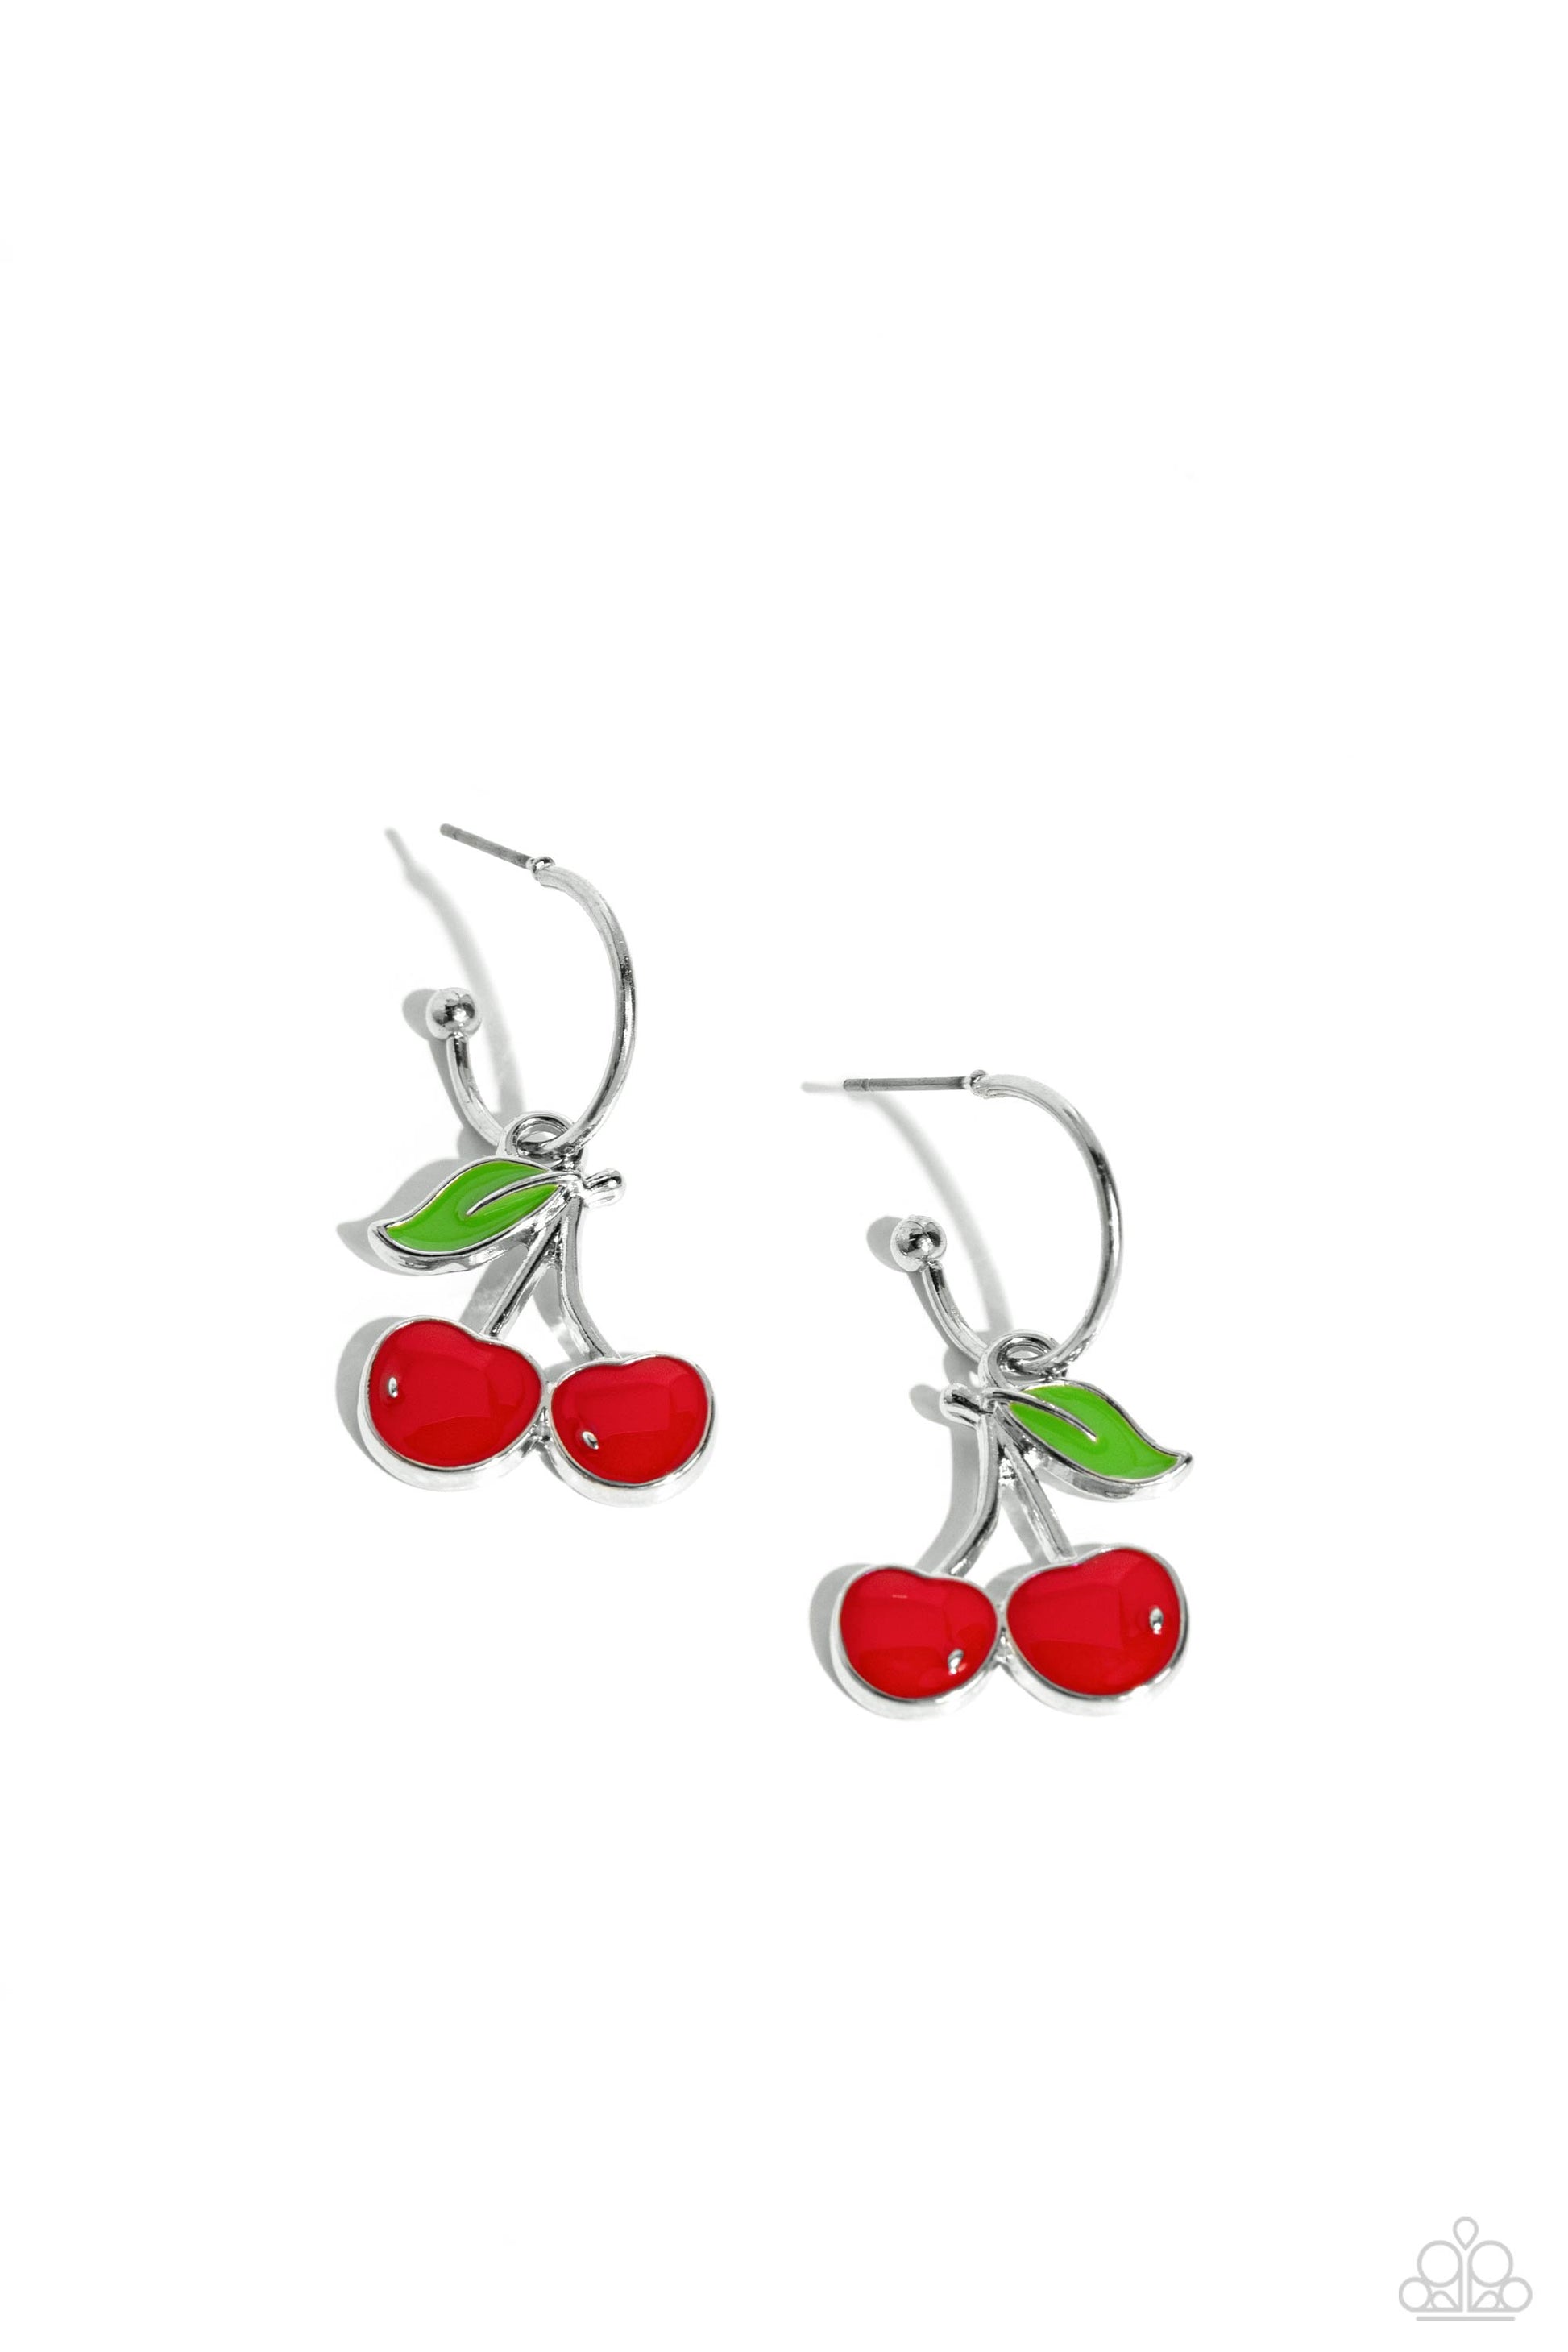 Paparazzi Accessories - Cherry Caliber - Red Earrings a small, skinny, silver hoop curves around the ear, where a silver ball is affixed to create the look of a barbell. Two cherries slide along the hoop, showcasing a vibrant, summer-inspired style. Earring attaches to a standard post fitting. Hoop measure approximately 1/2" in diameter.  Sold as one pair of hoop earrings.